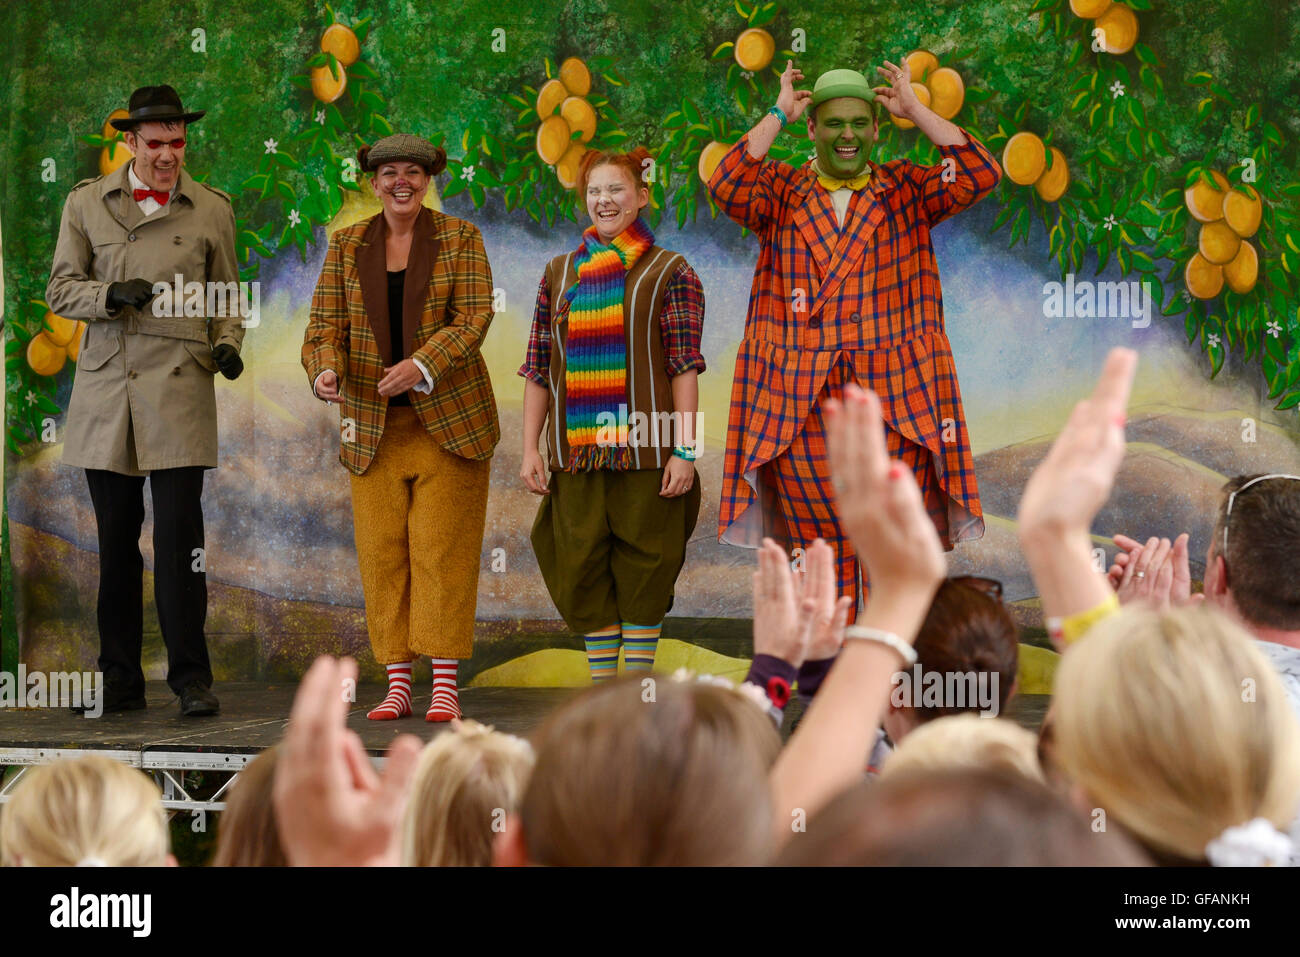 Carfest North, Bolesworth, Cheshire, UK. 30th July, 2016. A children's play being held in the Culture Club tent. The event is the brainchild of Chris Evans and features 3 days of cars, music and entertainment with profits being donated to the charity Children in Need. Credit:  Andrew Paterson/Alamy Live News Stock Photo